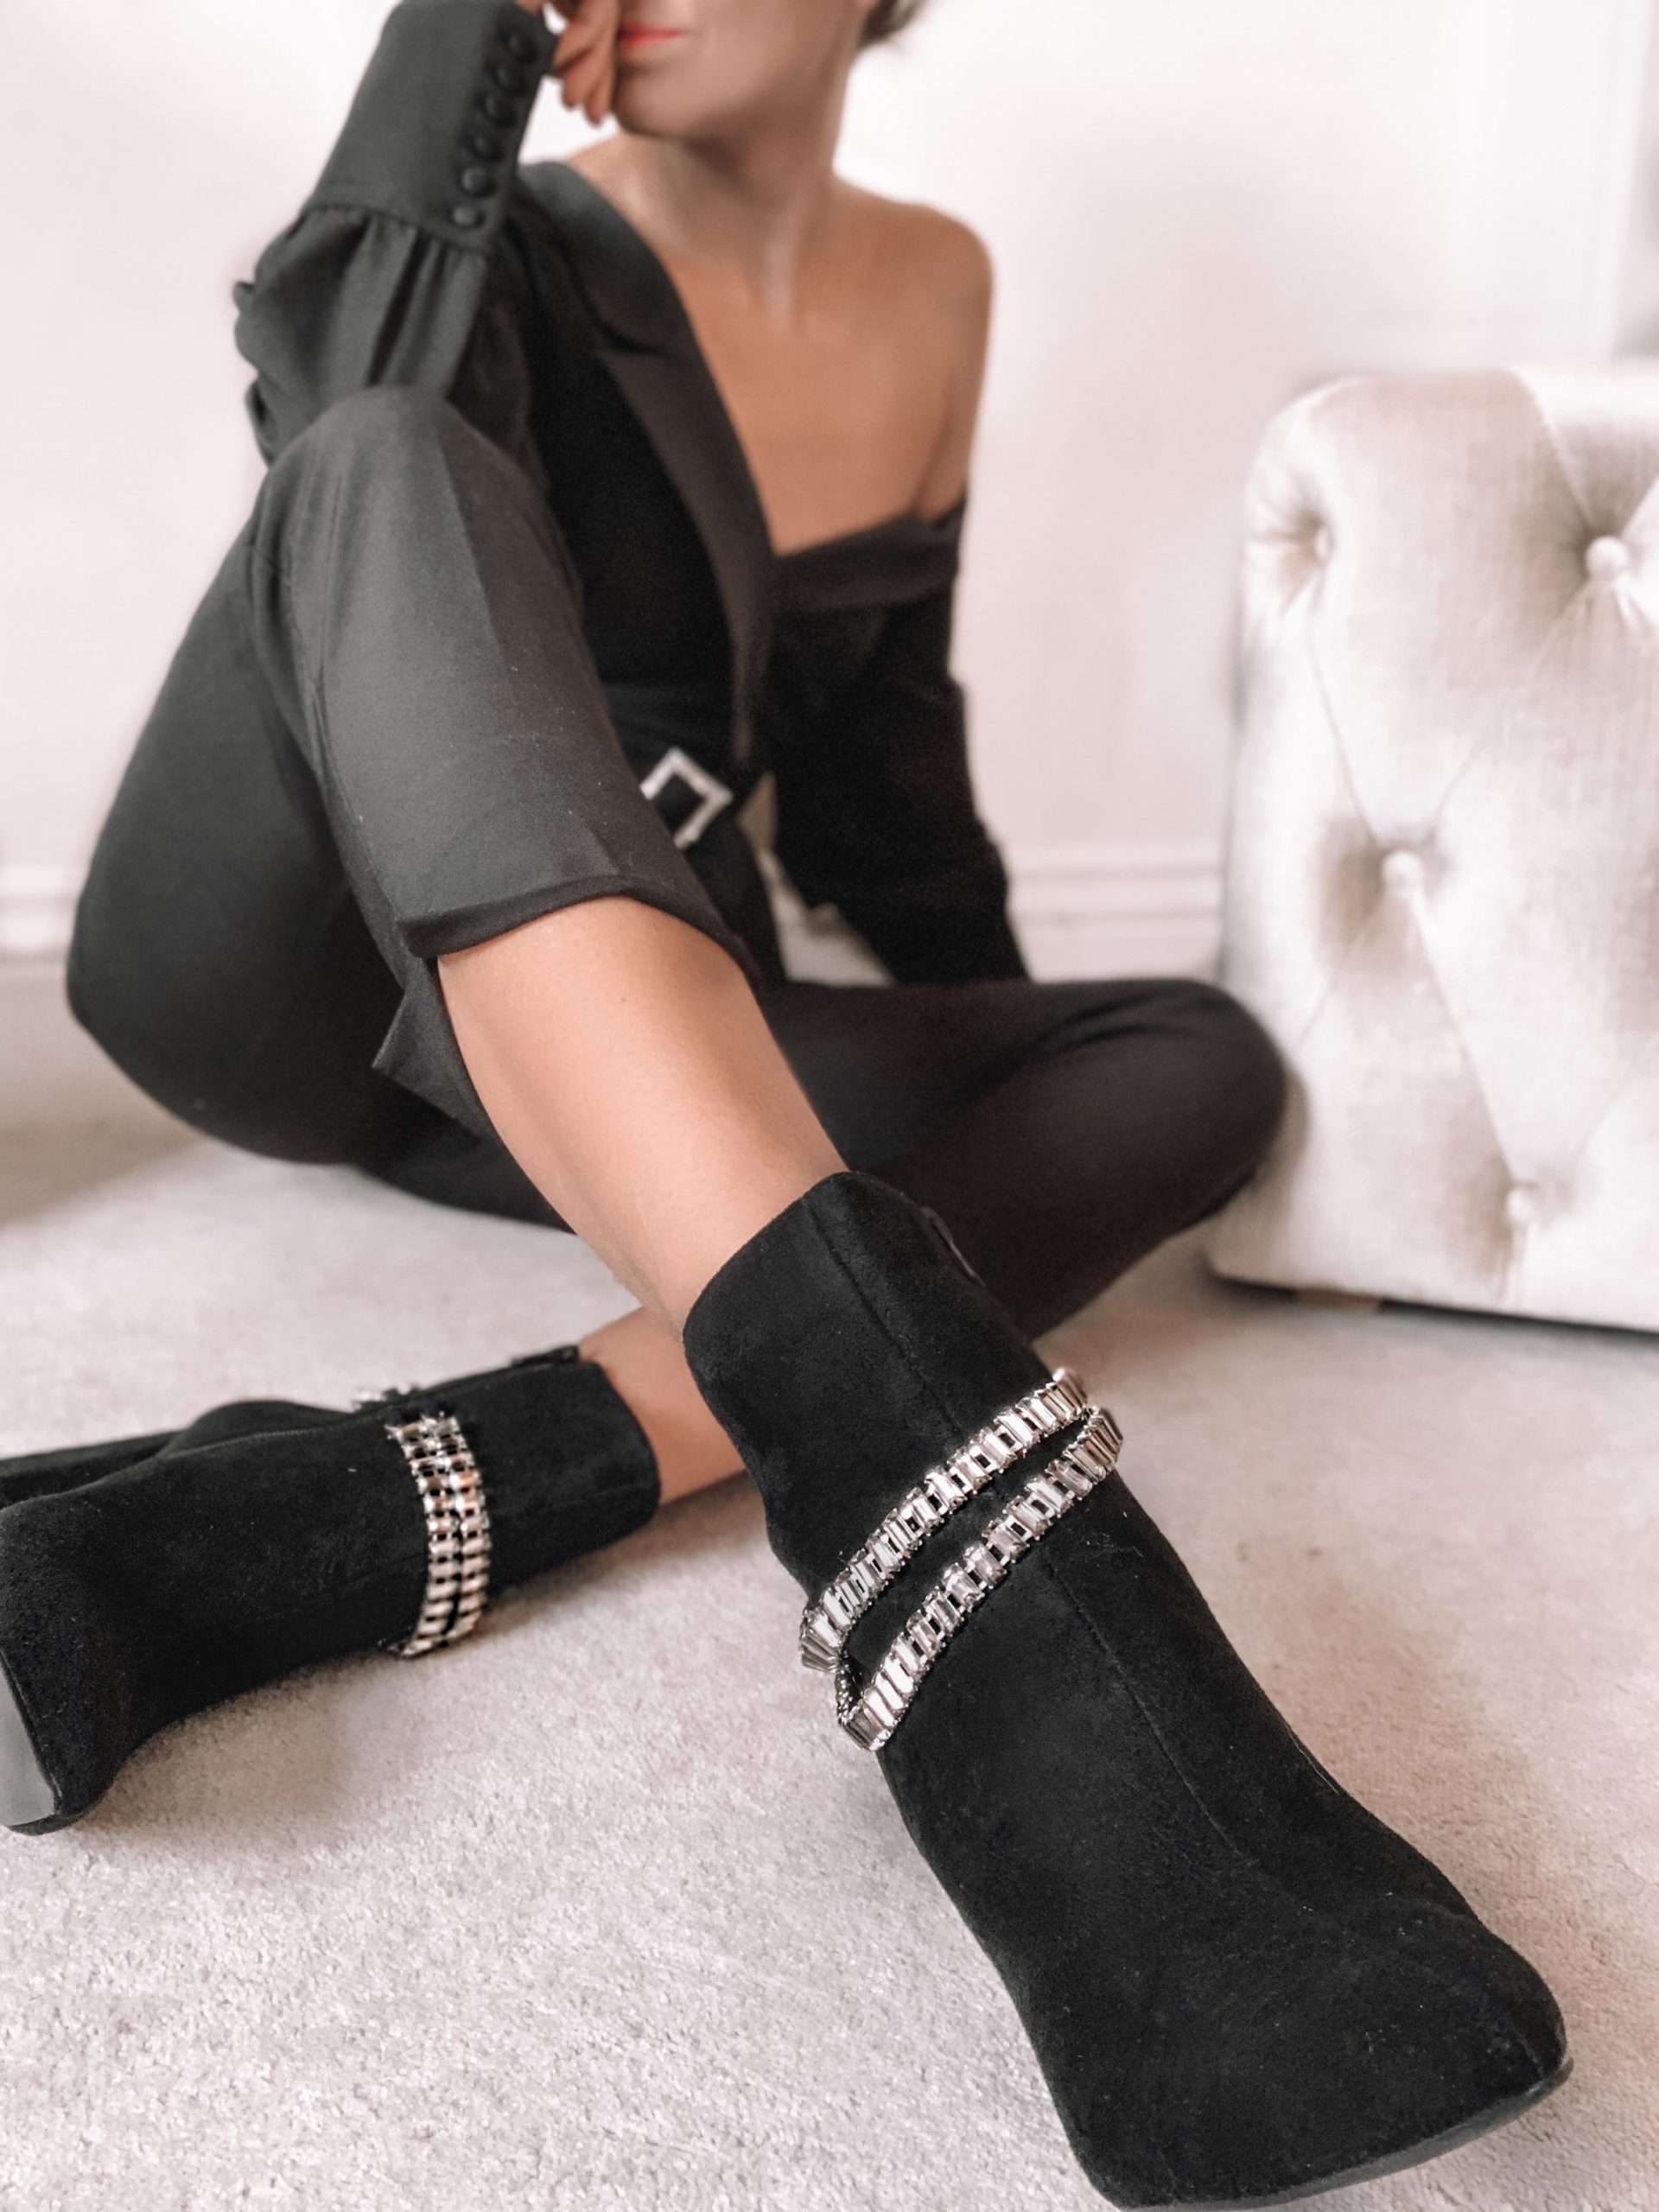 London Rebel pointed block heel ankle boots in black with crystal chain